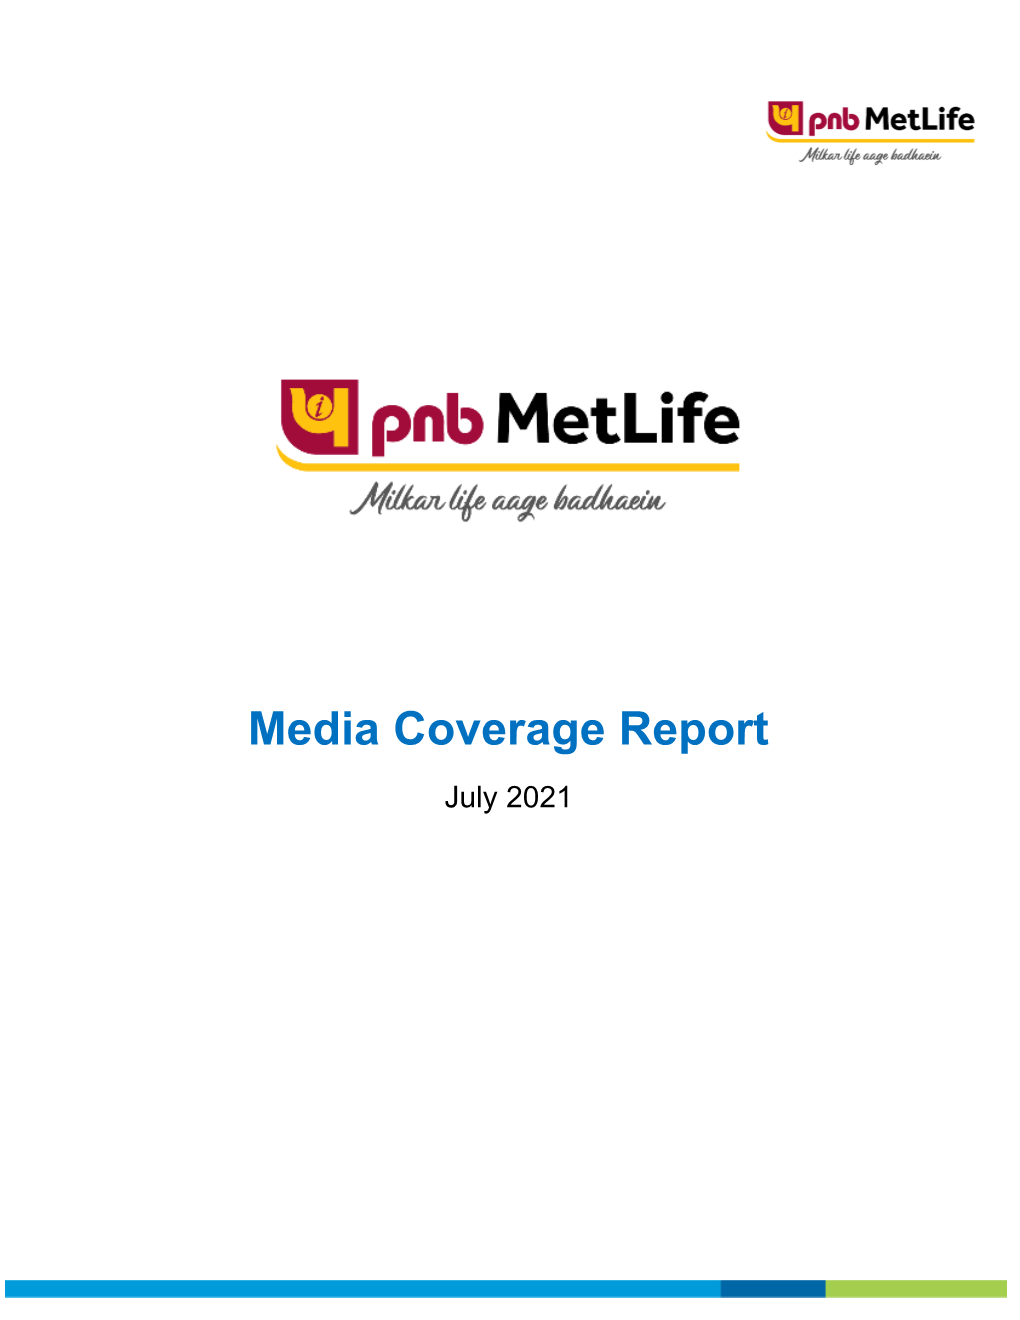 Media Coverage Report July 2021